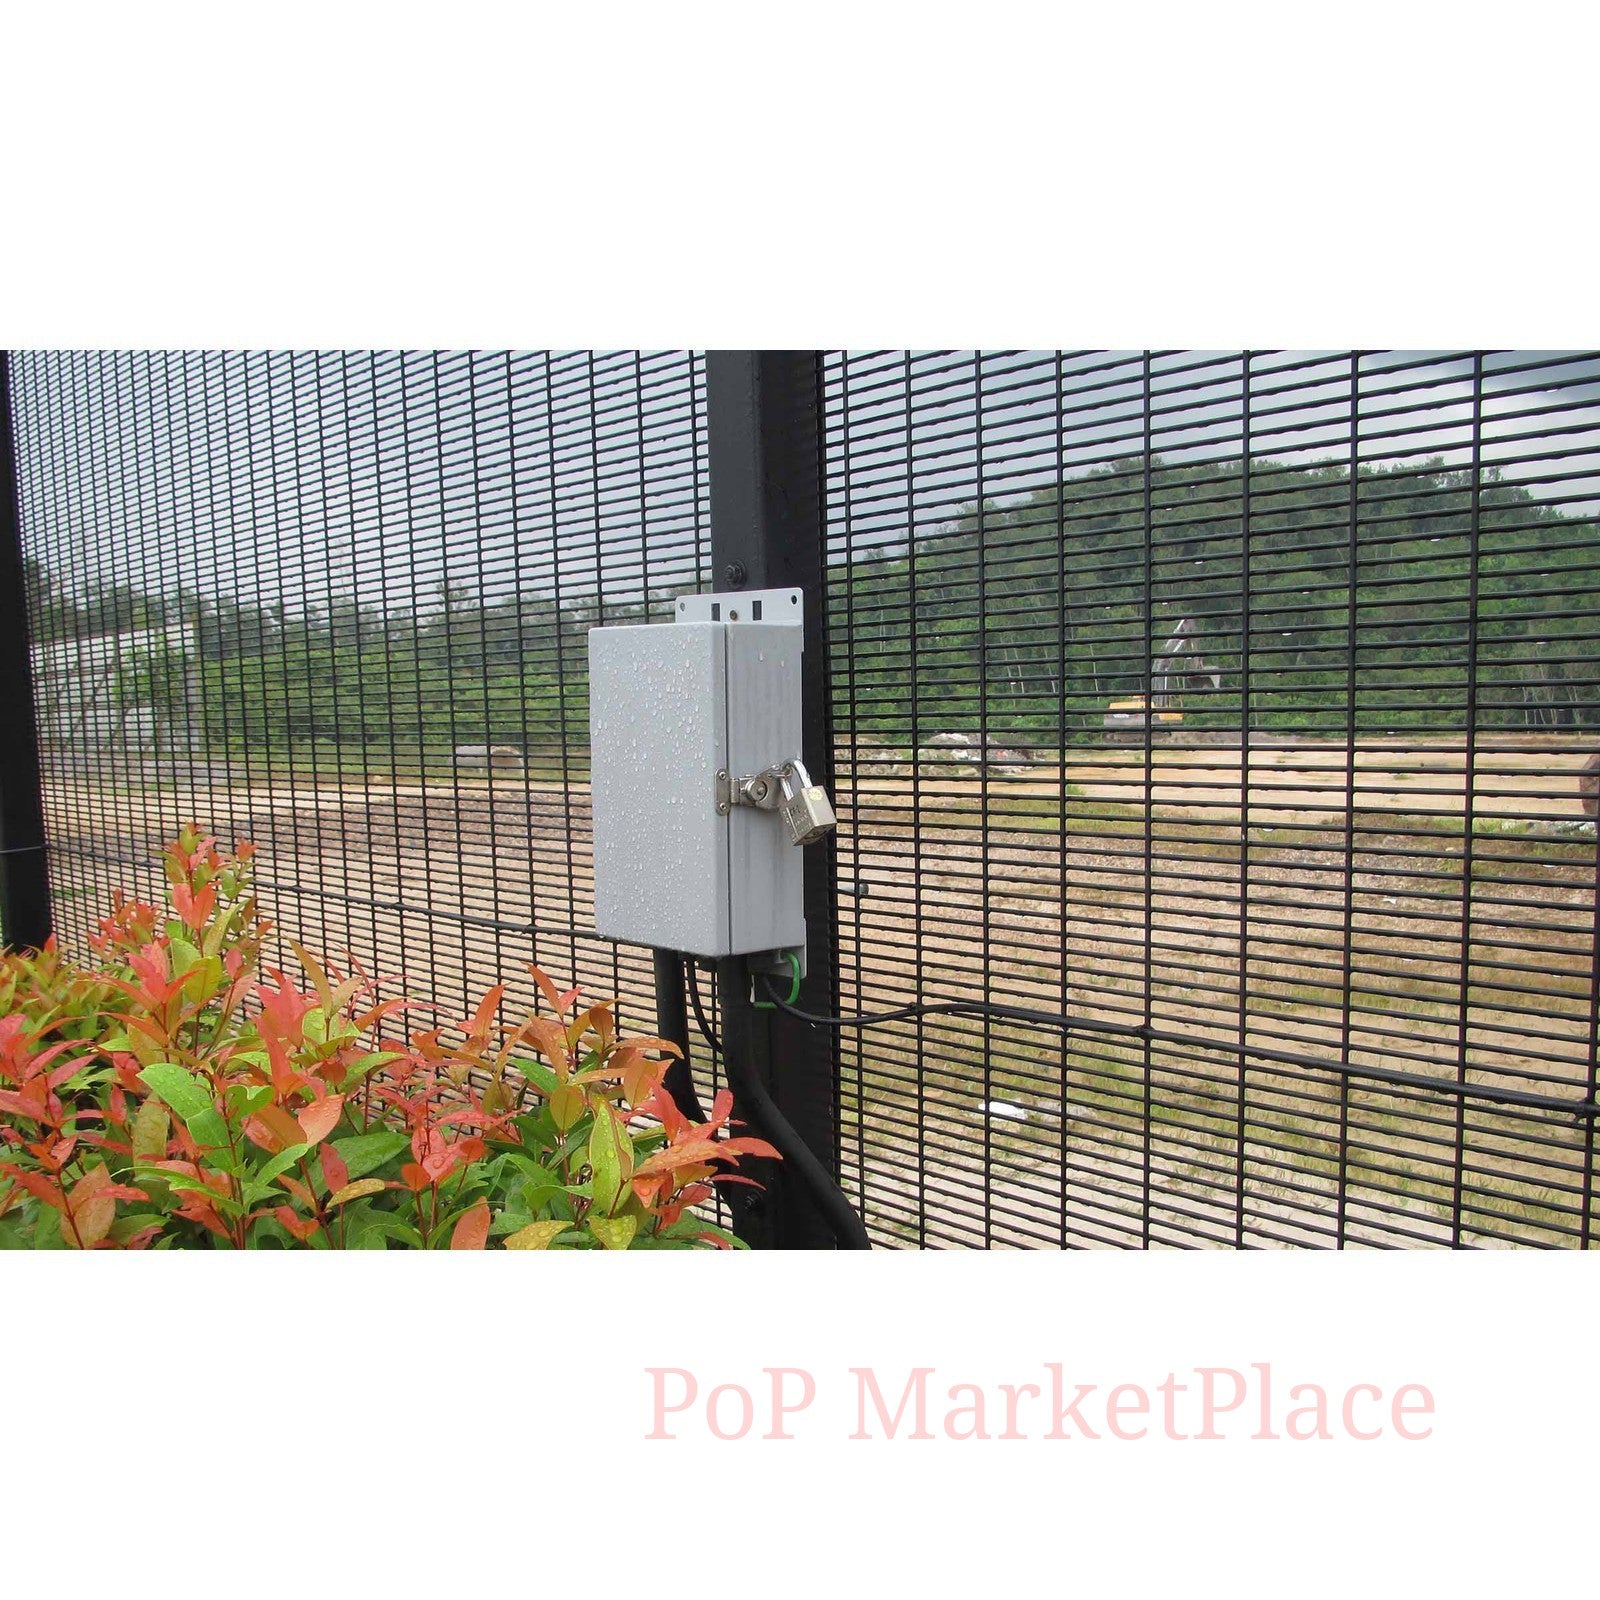 FENCETECH: SuperSensor Fence Mounted Perimeter Intrusion Detection System Globalgroup-defense